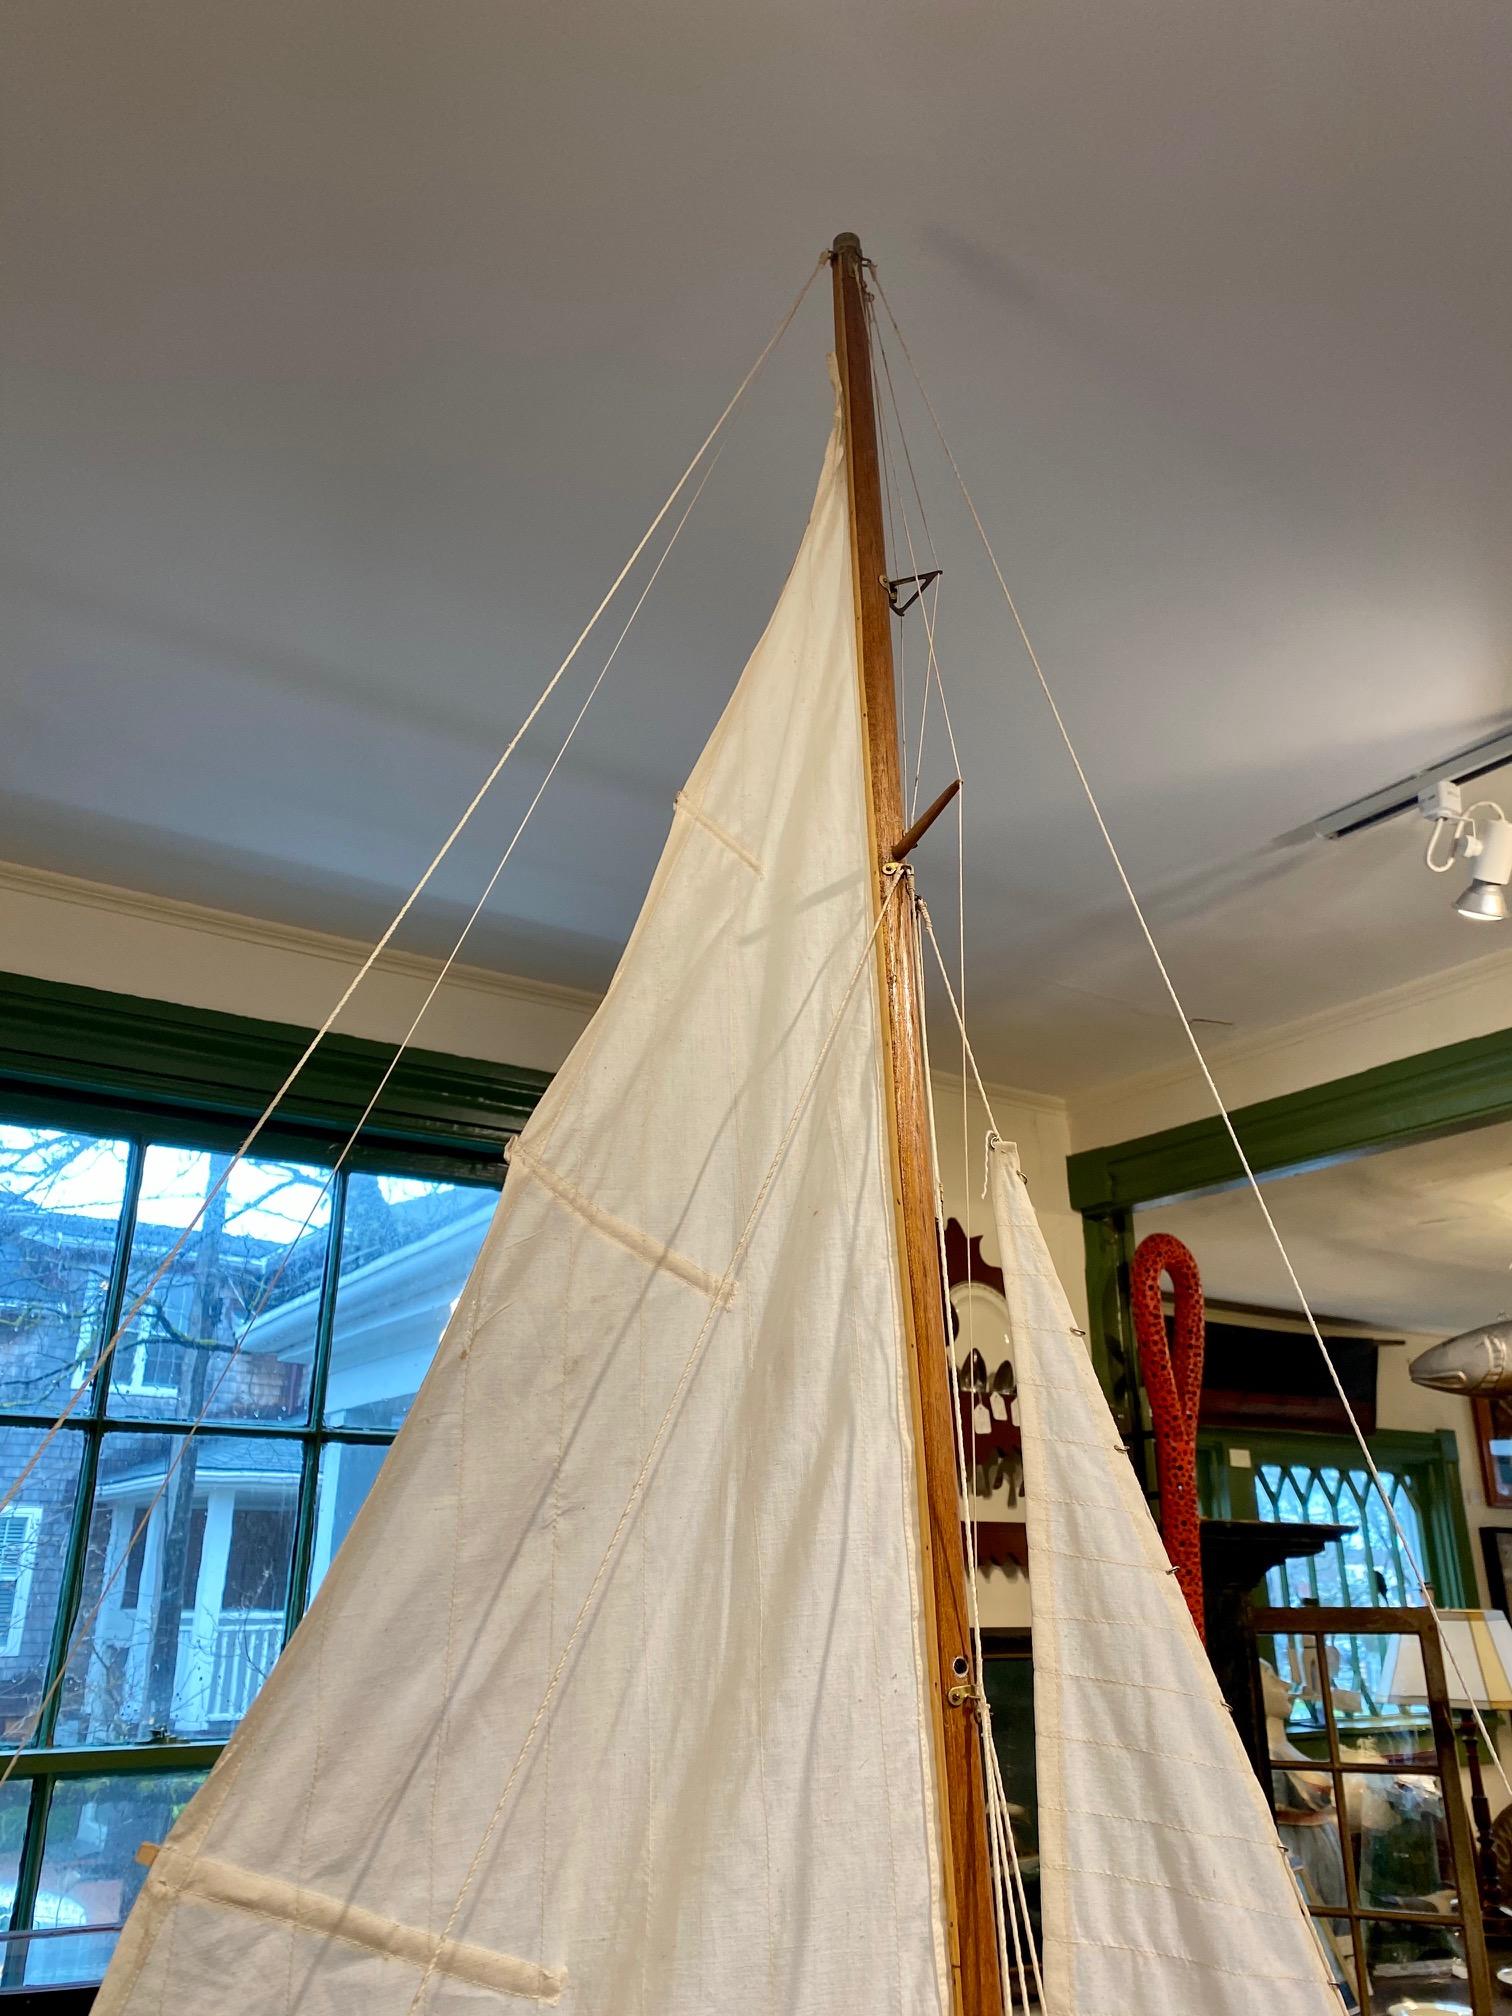 Antique American sloop rigged sailing pond model, circa 1900, having a high Marconi rig with double spreaders and full running rigging, on hollow hull with planked deck and lead keel. 

The vintage working rigging is not original but probably had